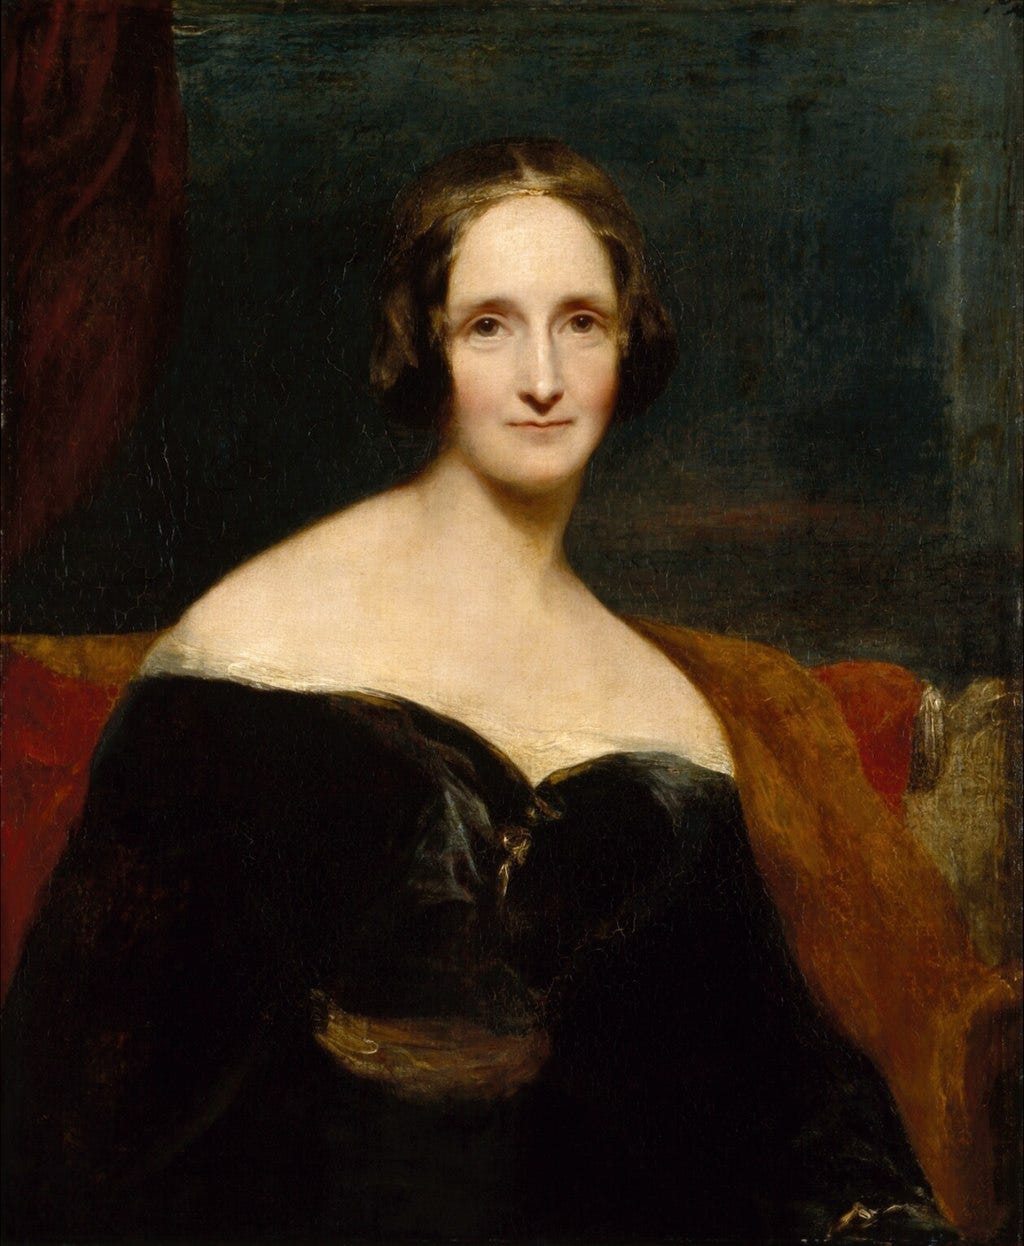 Half-length portrait of a woman wearing a black dress sitting on a red sofa. Her dress is off the shoulder. The brush strokes are broad.